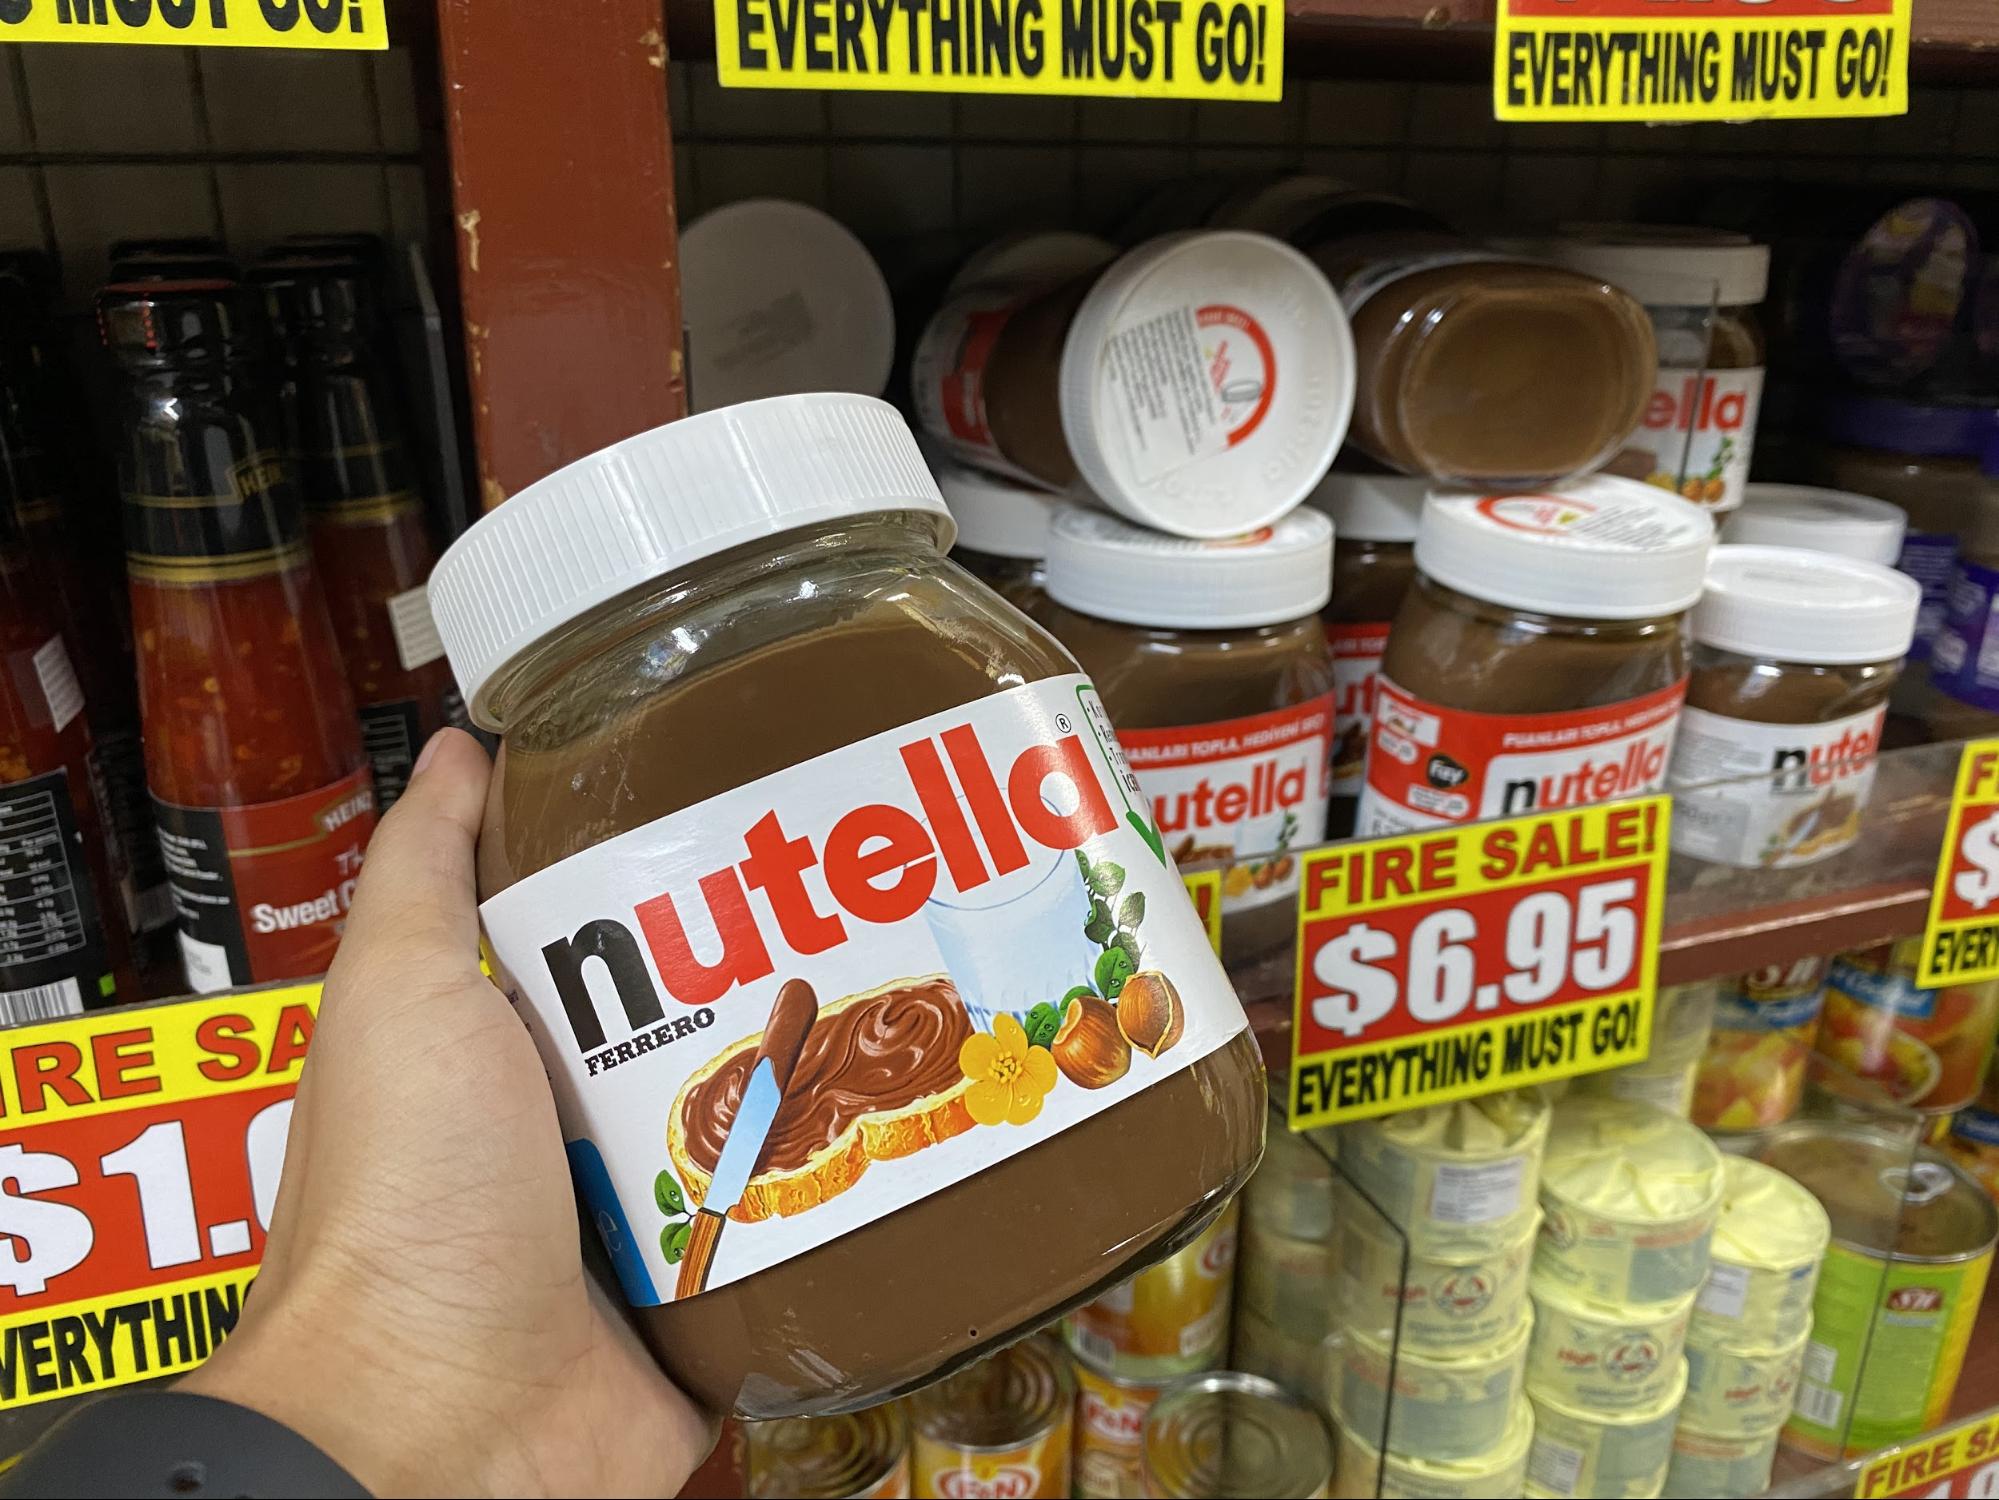 Nutella breakfast spread at the value dollar store in Singapore